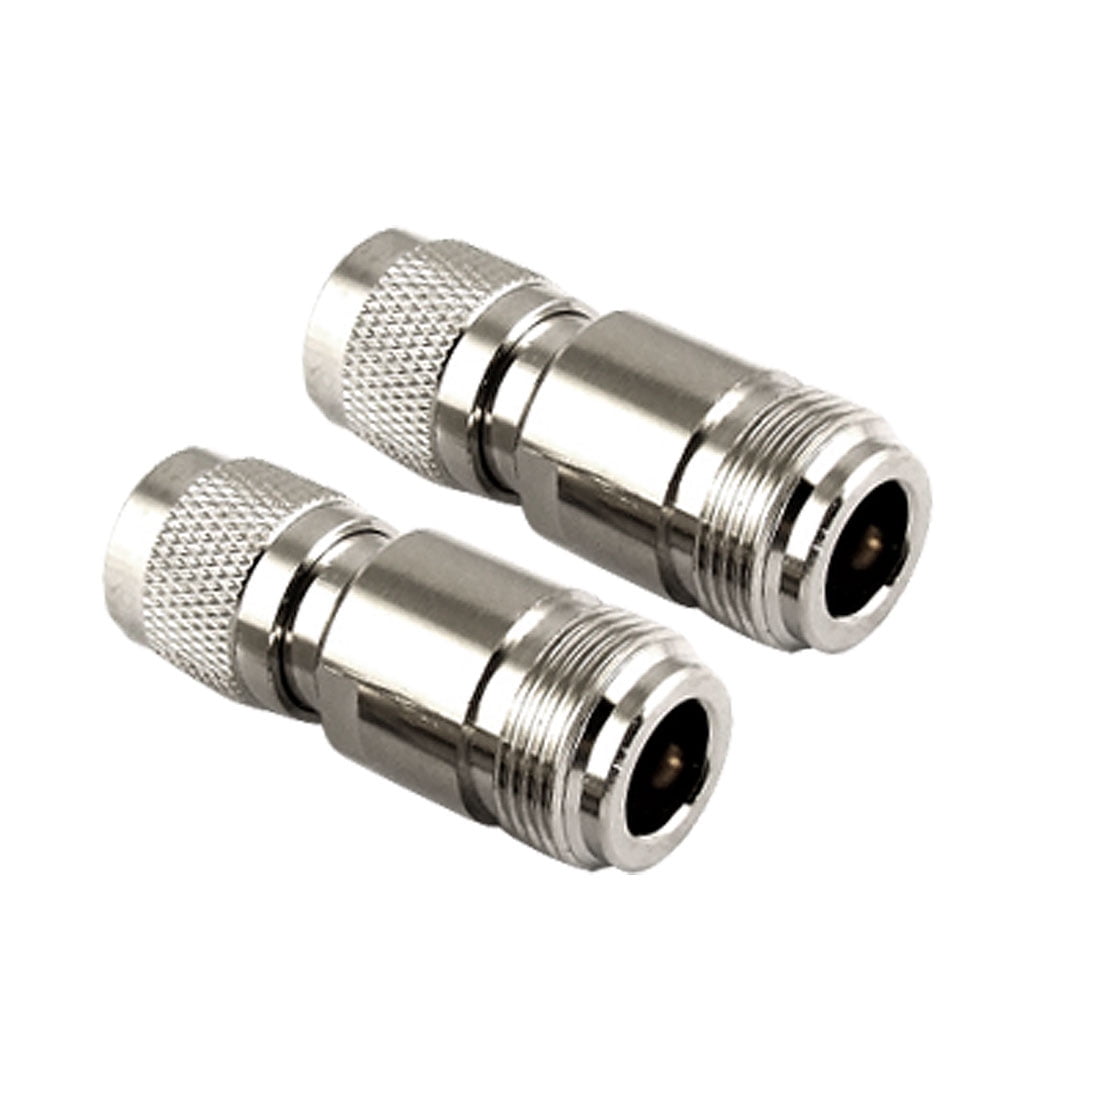 2Pcs Straight Adapter Compact N Male to TNC Female Connector